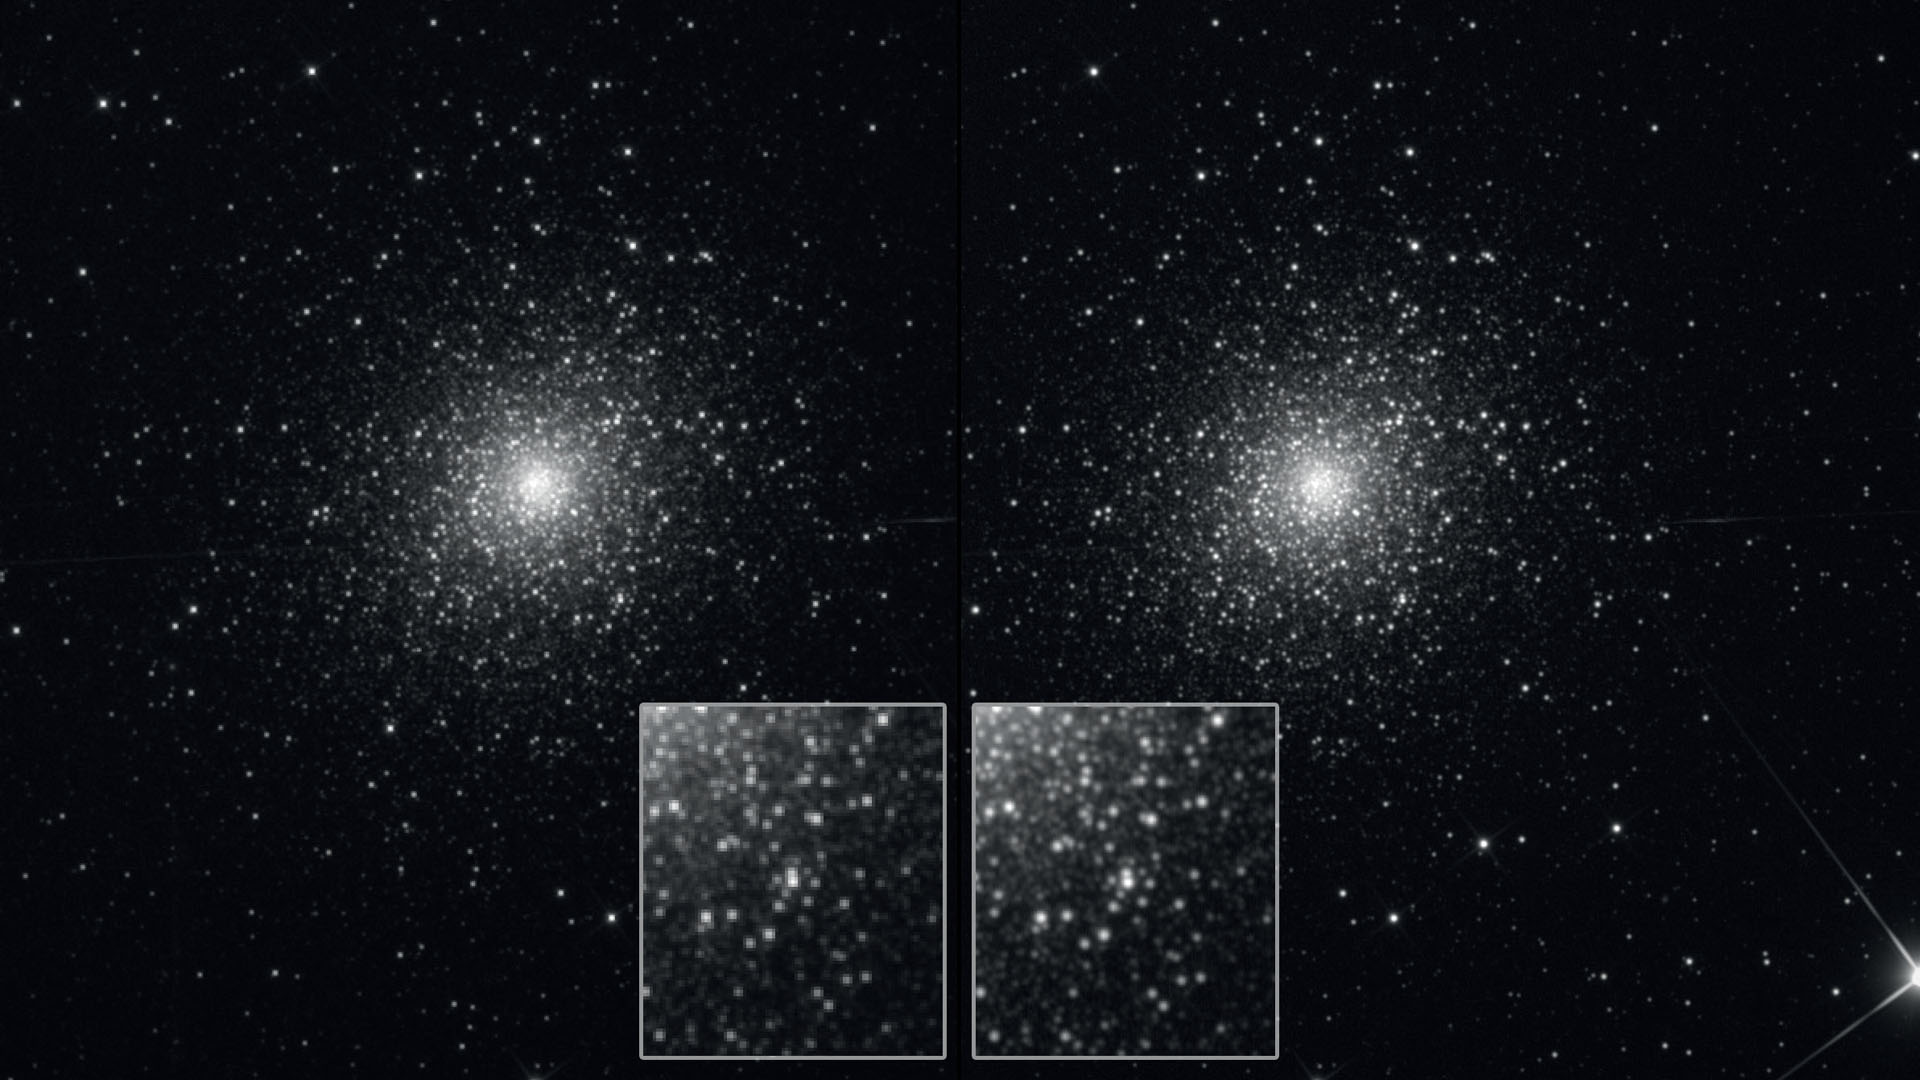 20 images, each with 300s exposure time, of the globular cluster M5 - on the left with normal stacking, on the right with drizzle stacking. The normal version has been scaled to the same aspect ratio as the drizzled image for comparison. The setup for the process was in the undersampled area, recognizable by the presence of many star forms that are not perfectly rendered, they appear somewhat pixelated. A refractor with 105mm aperture and 670mm focal length was equipped with a camera with 9μm pixels. Sampling is therefore at 2.77"/pixel with a theoretical resolving power of 1.14". With the drizzle technique (result on the right), a finer depiction of the densely-packed stars is possible – star pairs that are close together are more clearly separated. M. Weigand